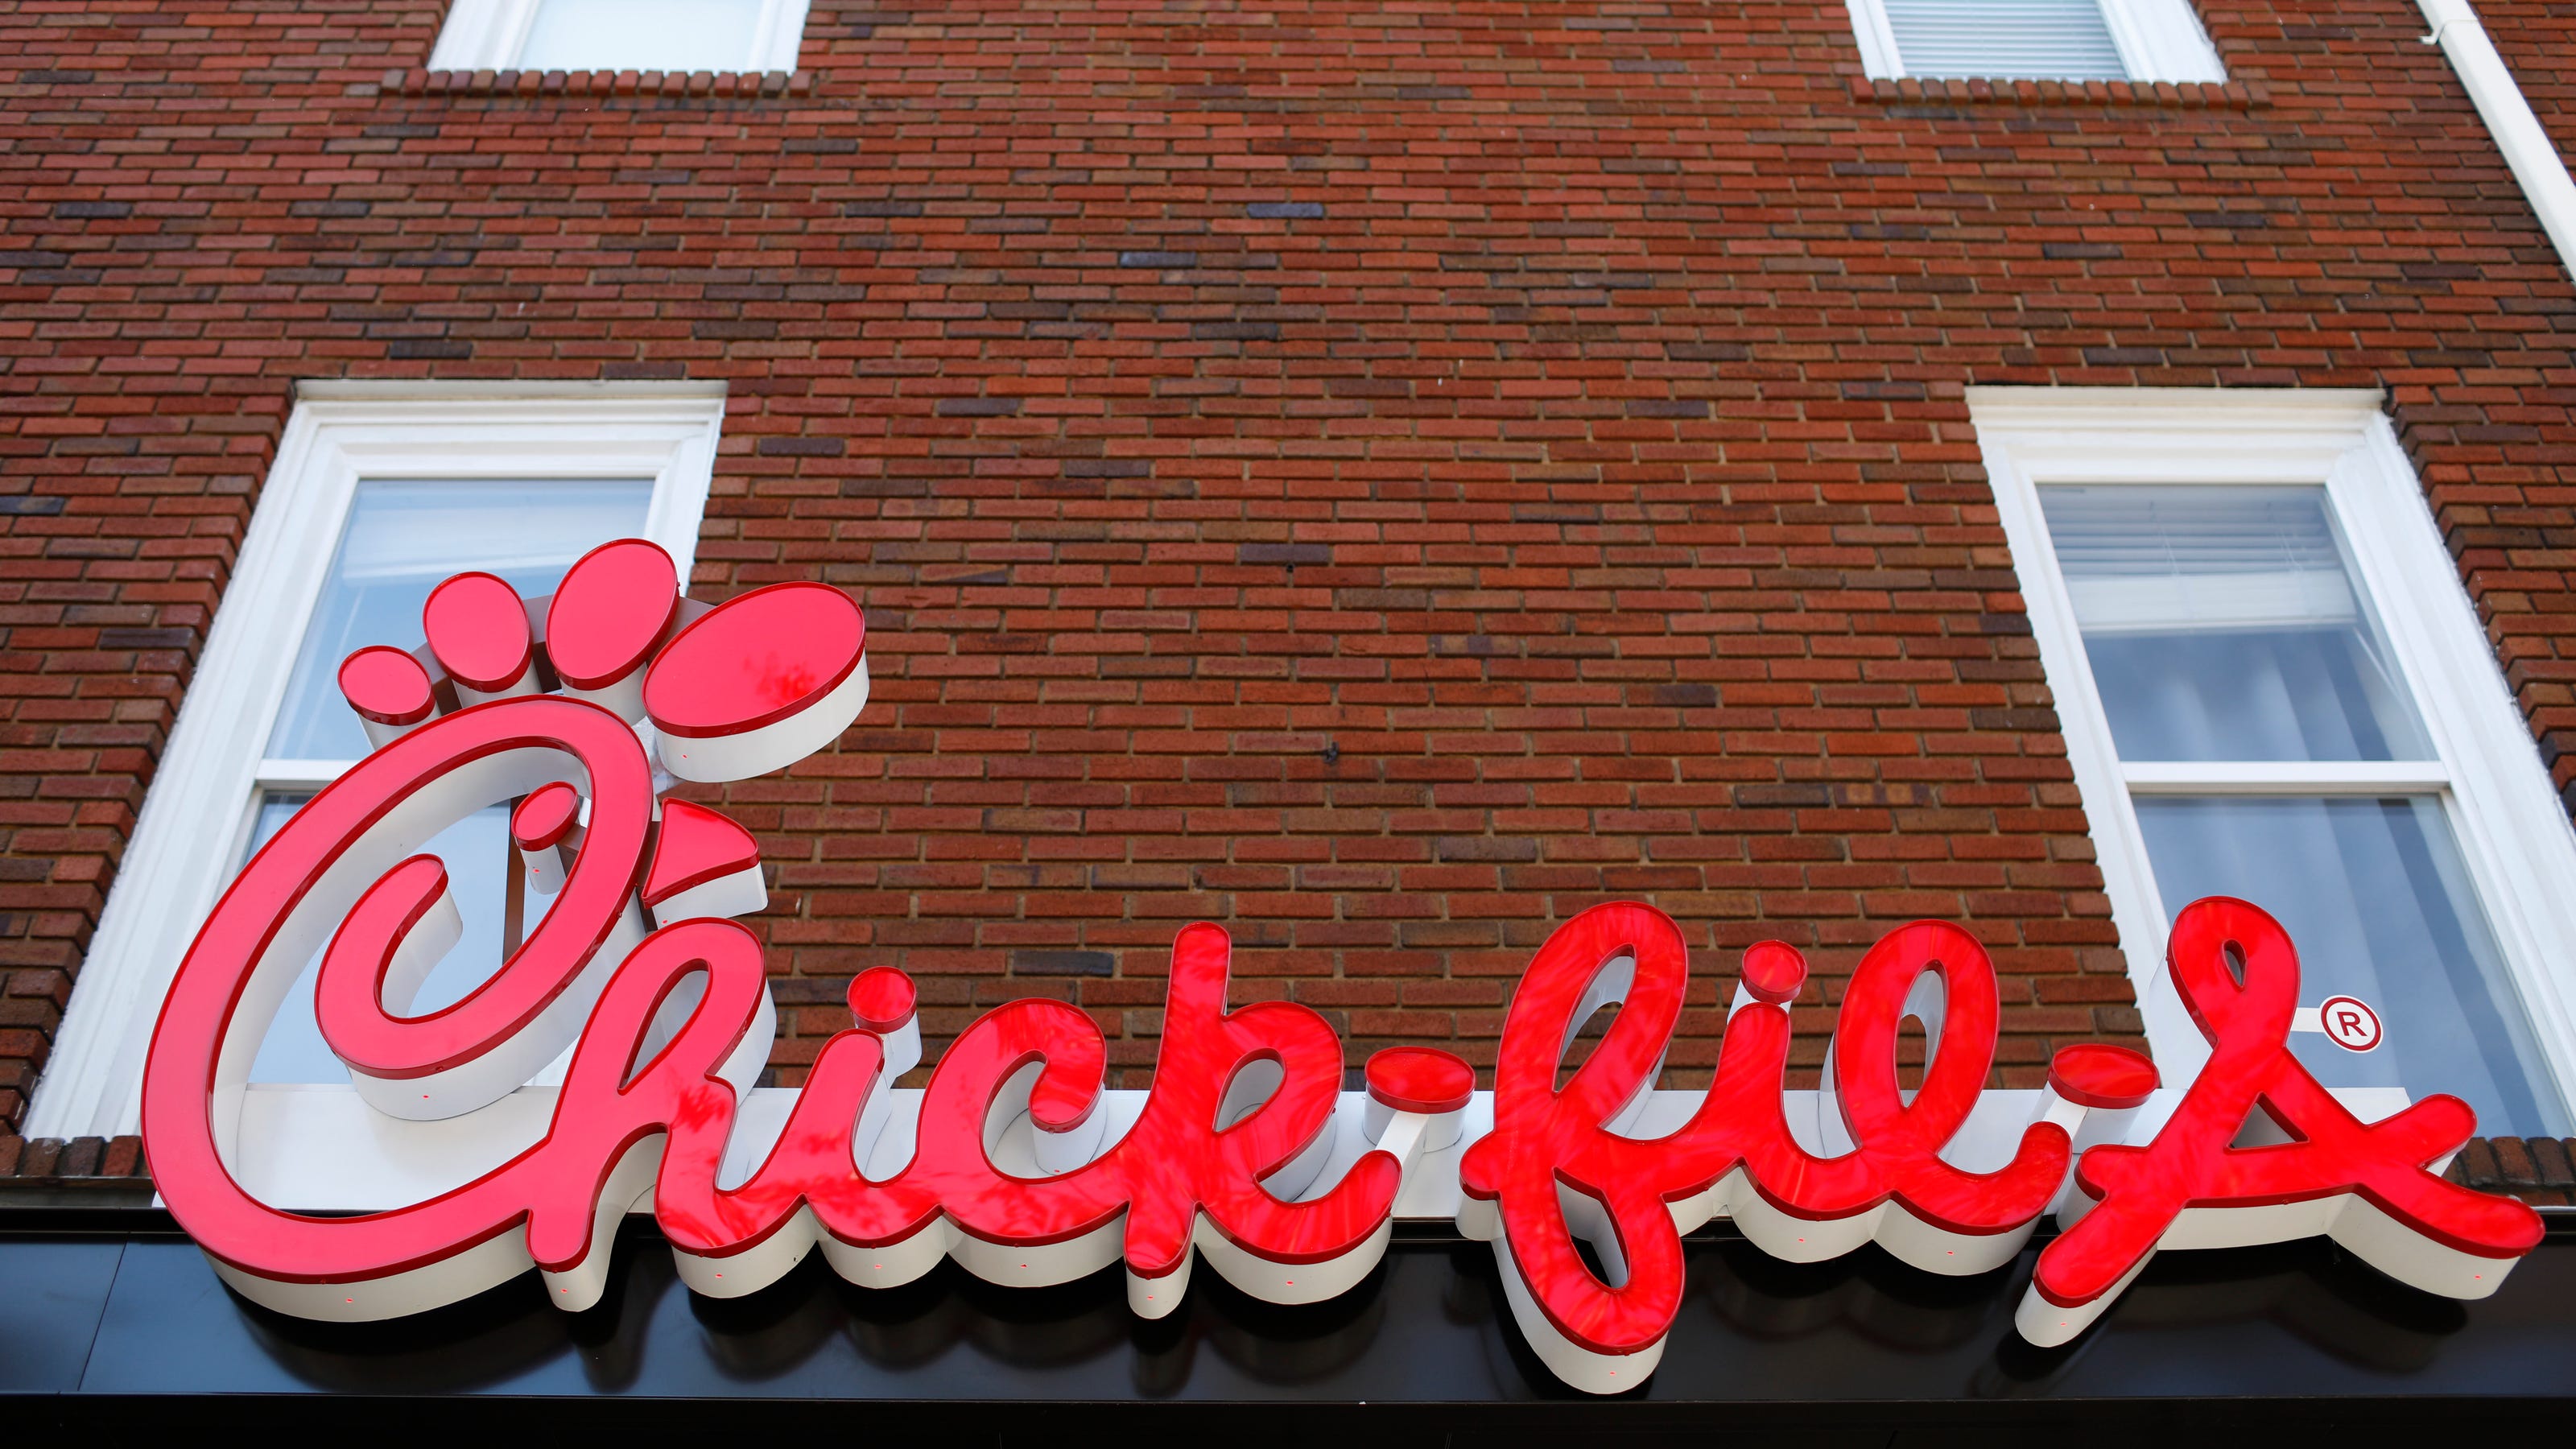 Chick Fil A Delivery Eatery Strikes Partnership With Doordash